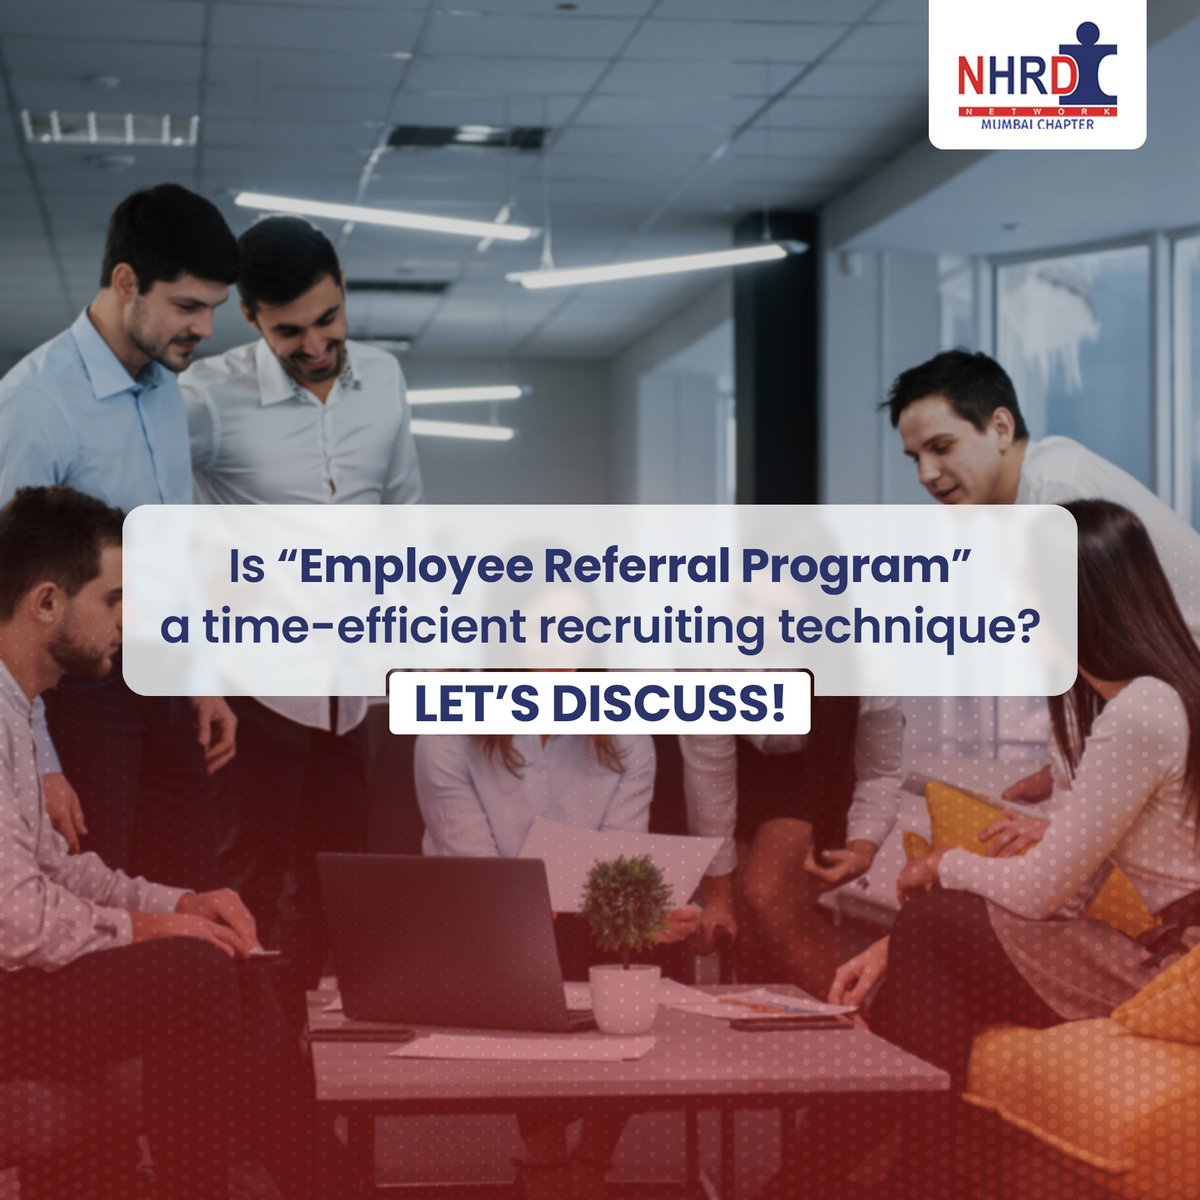 Comment down the recruiting techniques you think are the best 👇 #NHRDN #HR #HRDepartment #ShareYourThoughts #HRCommunity #LetUsKnow #NHRDNMumbai